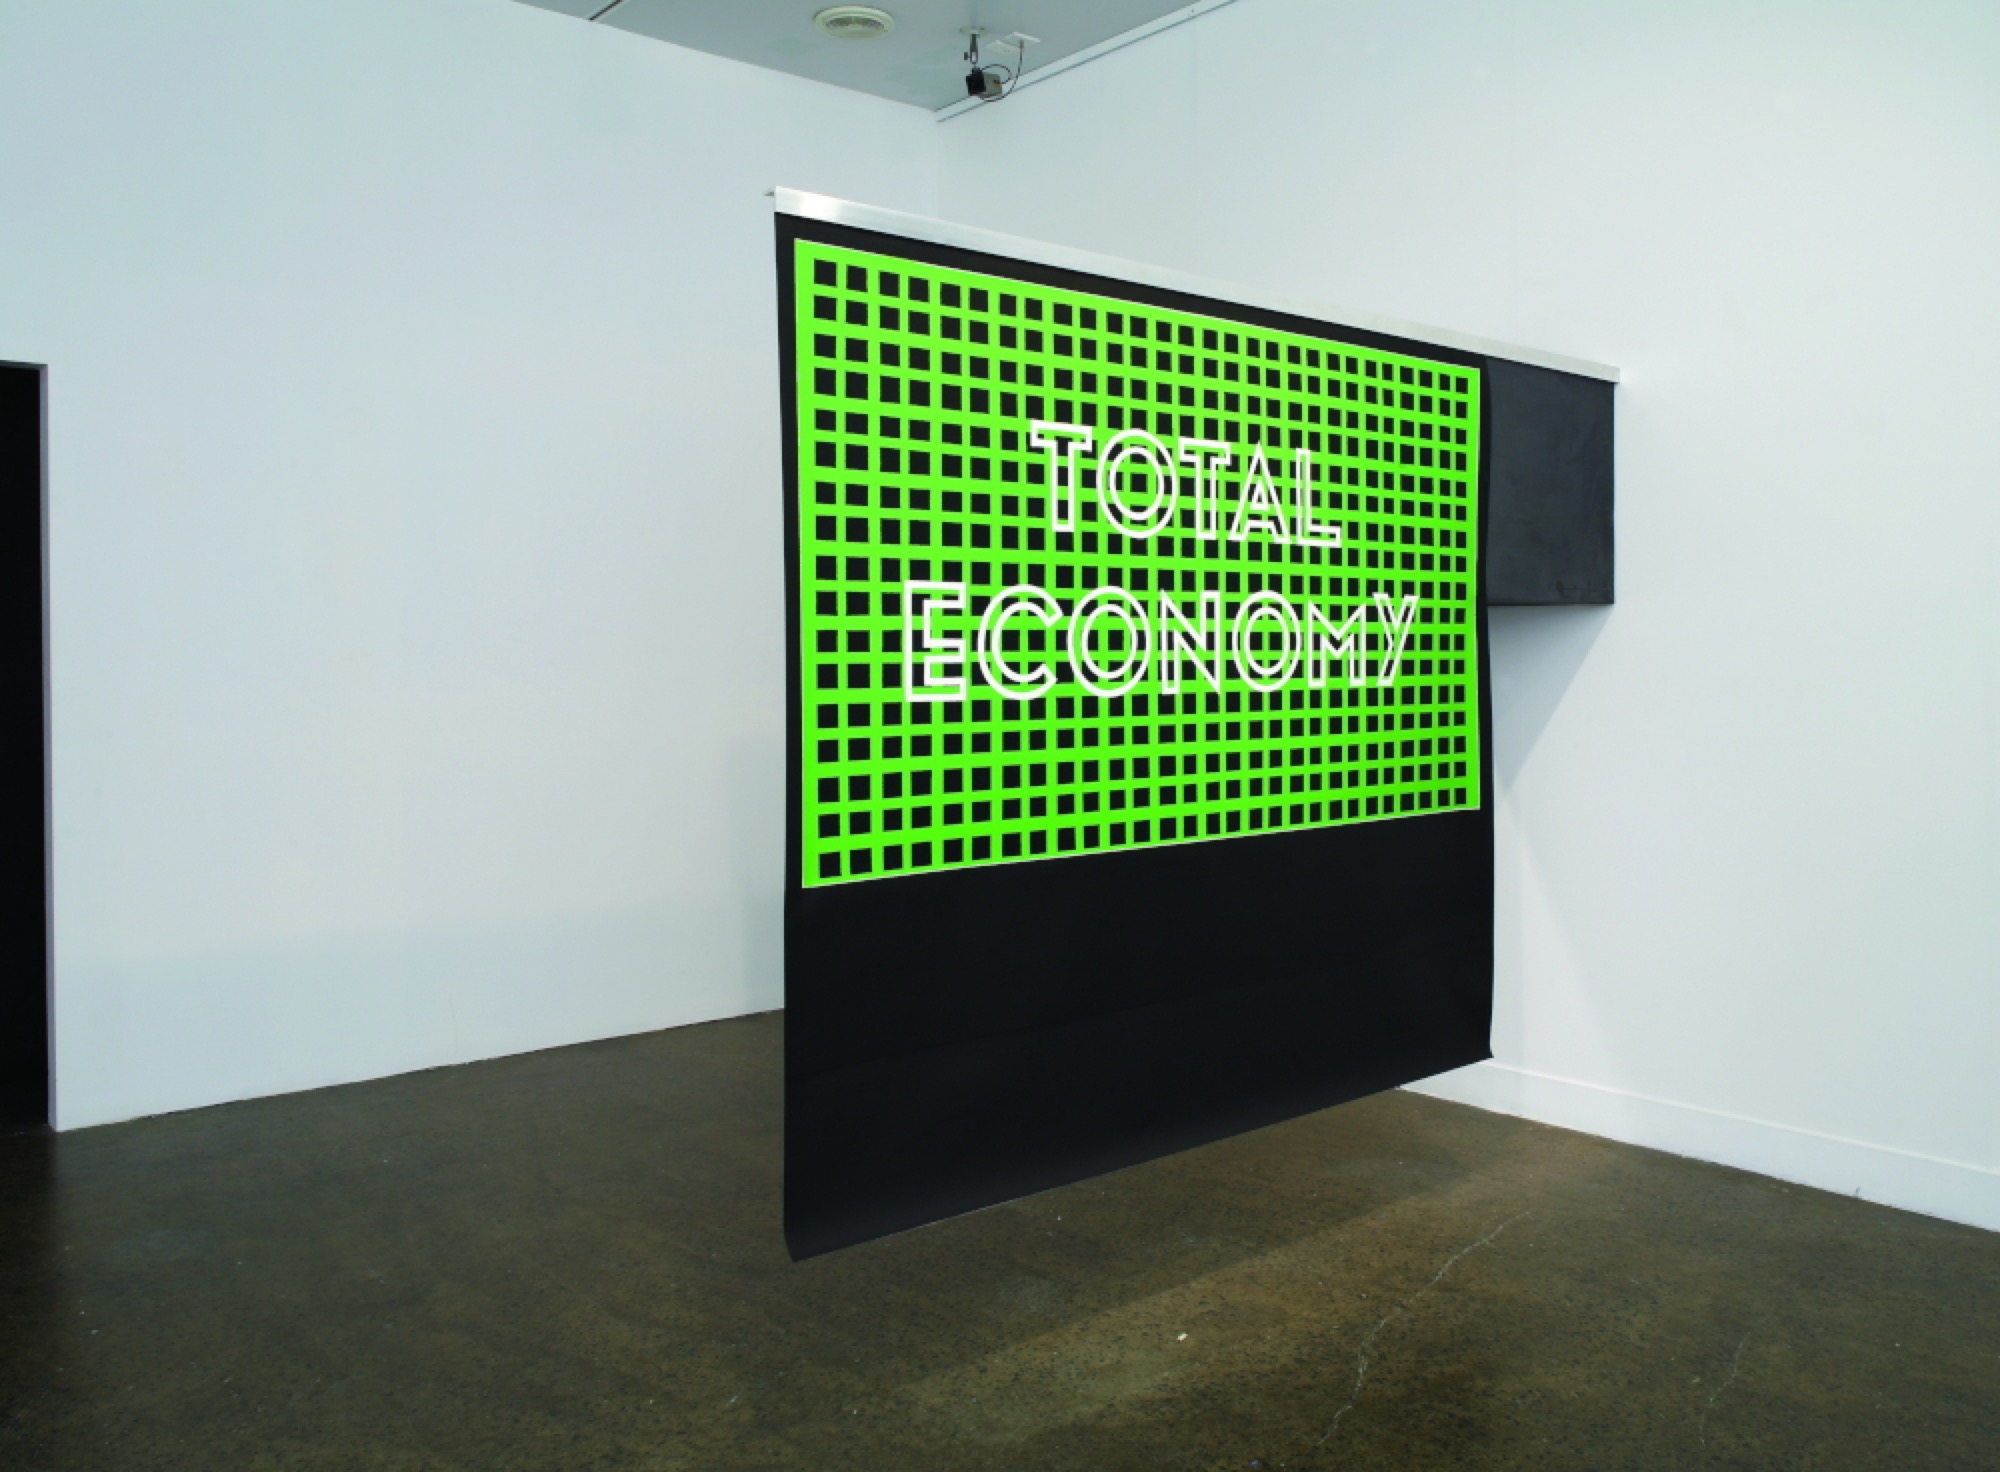 Janet Burchill and Jennifer McCamley, <em>Total Economy</em> 2007, synthetic polymer paint on vinyl protection screen, steel box, screen: 228 x 2017 cm, box: 60 x 60 x 120 cm, courtesy of the artists and Neon Parc, Melbourne.